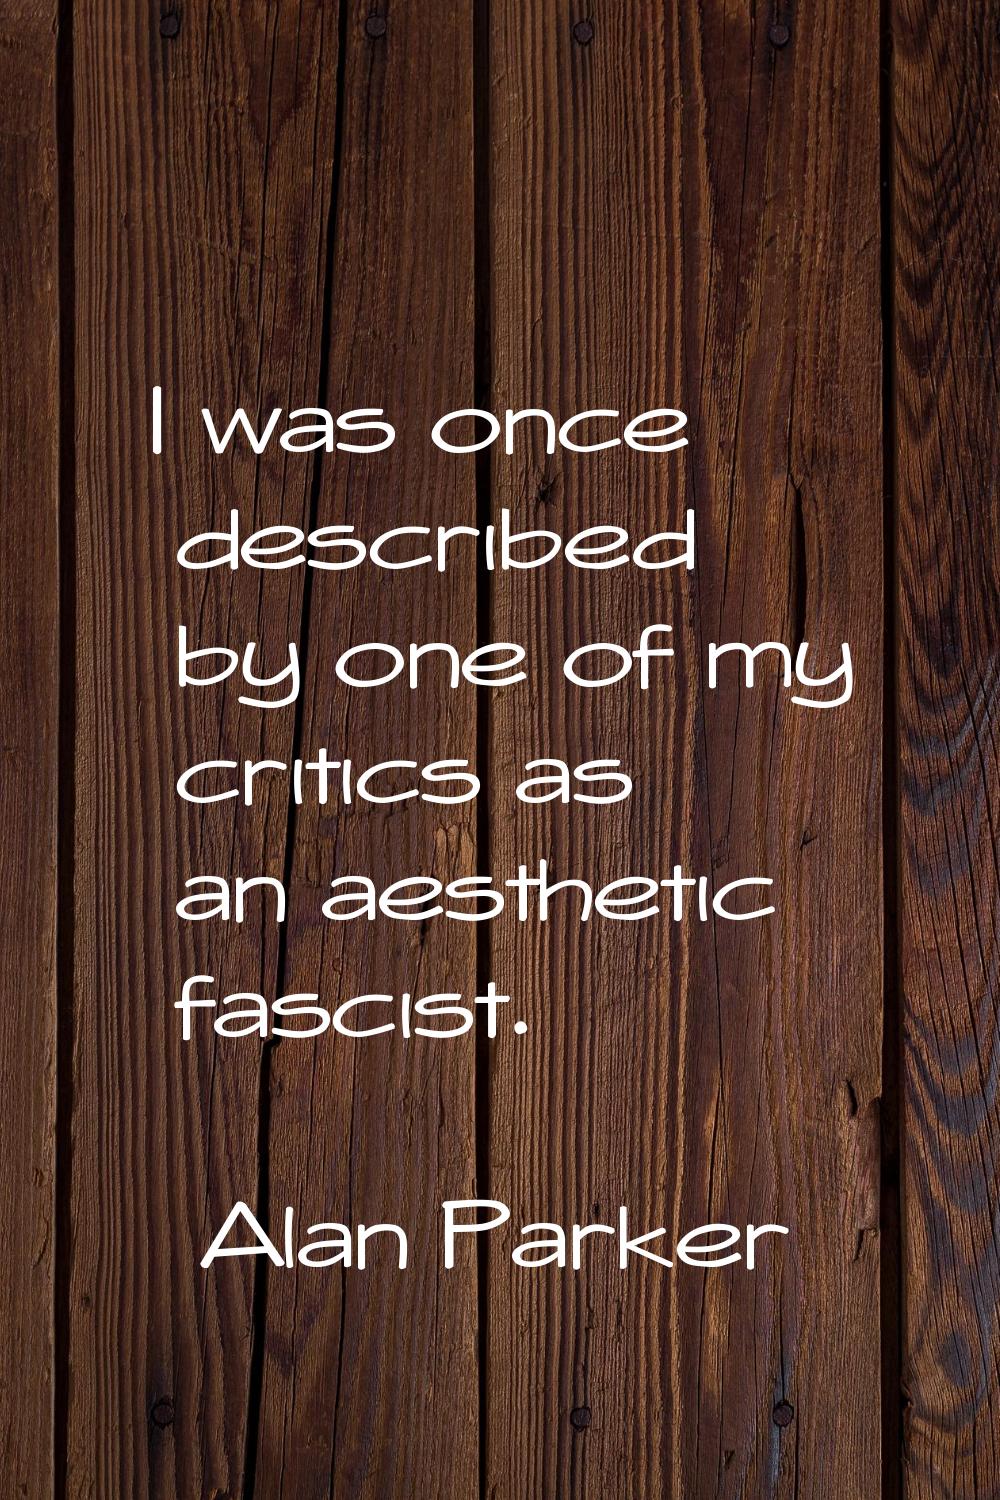 I was once described by one of my critics as an aesthetic fascist.